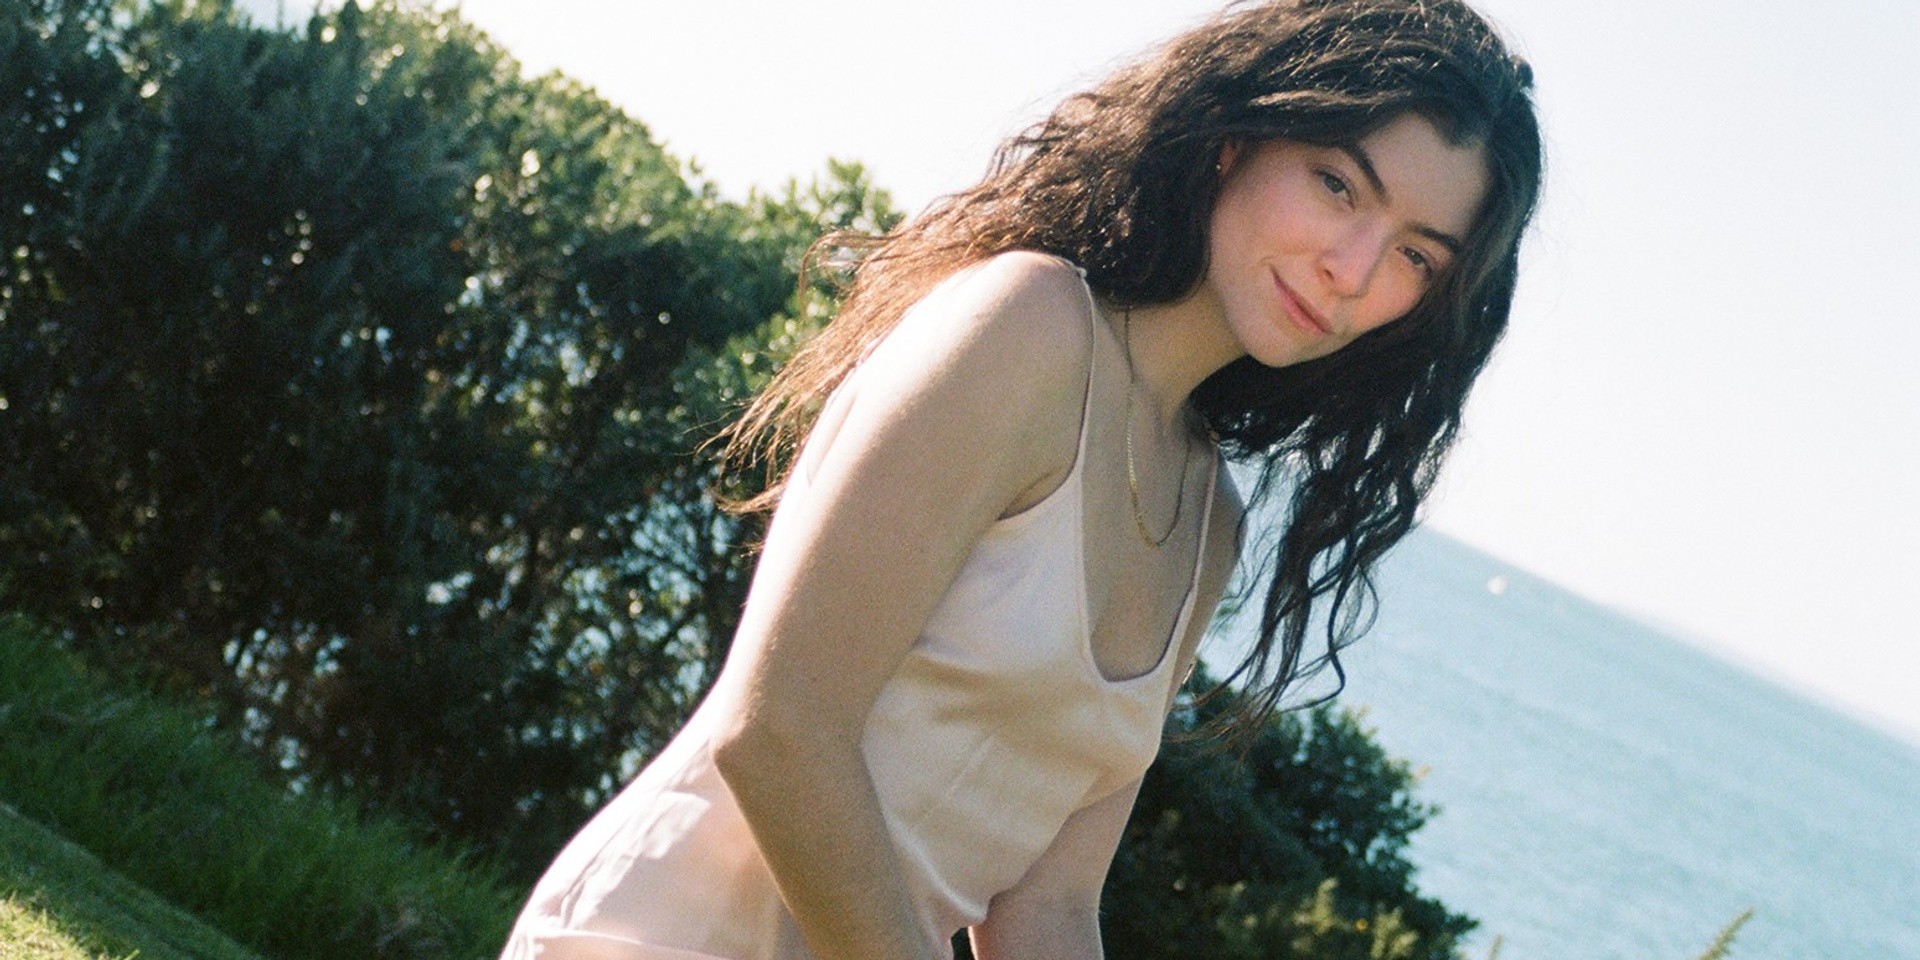 Lorde announces new 'Solar Power' album, tour details, and more, here's everything you need to know